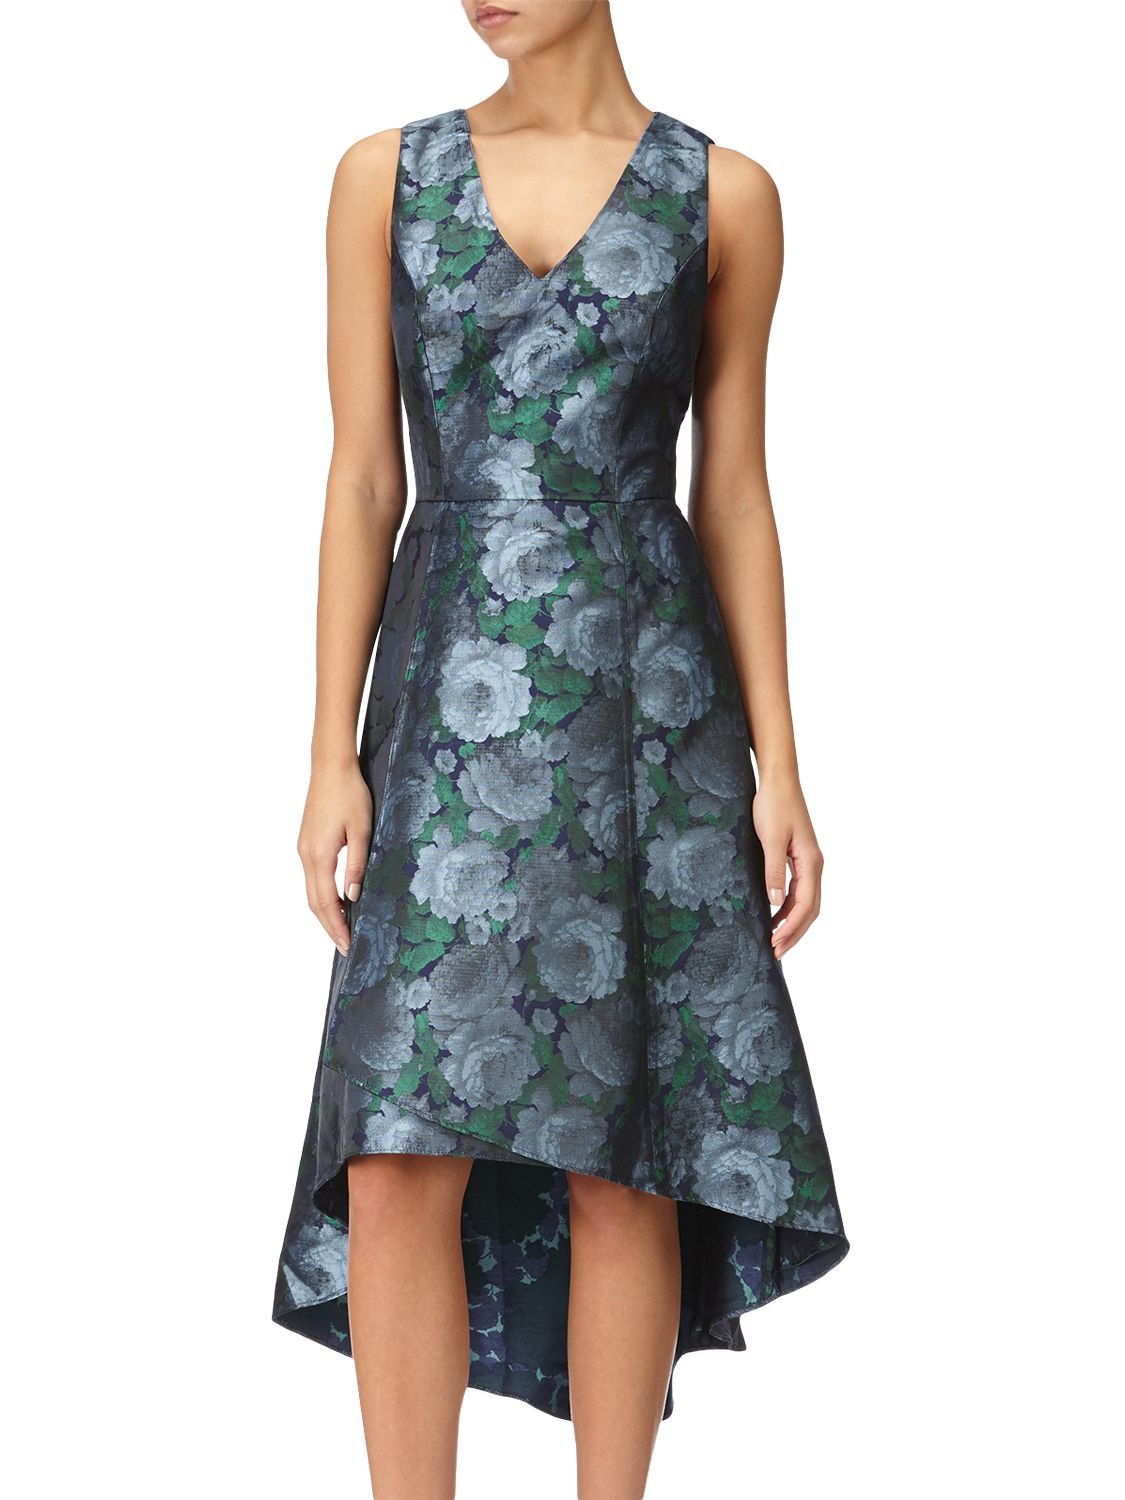 Adrianna Papell High-Low Floral Dress, Blue/Navy